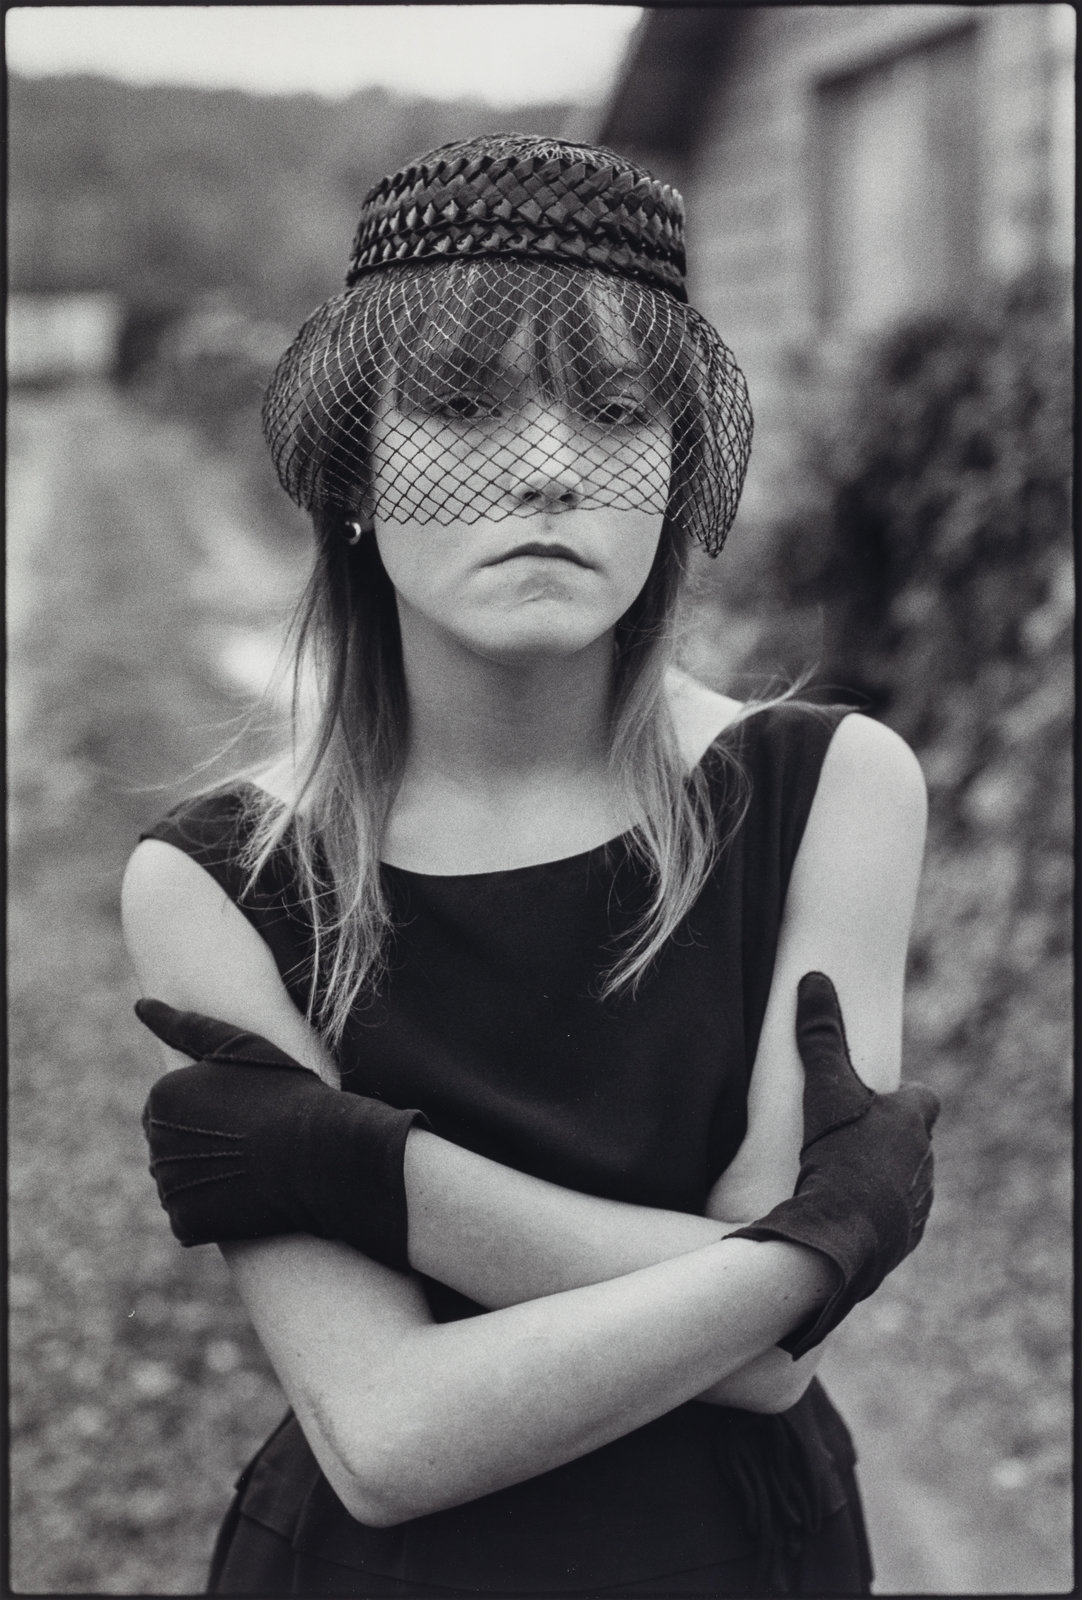 Tiny in Her Halloween Costume, Seattle, from series "Streetwise" by Mary Ellen Mark, 1983